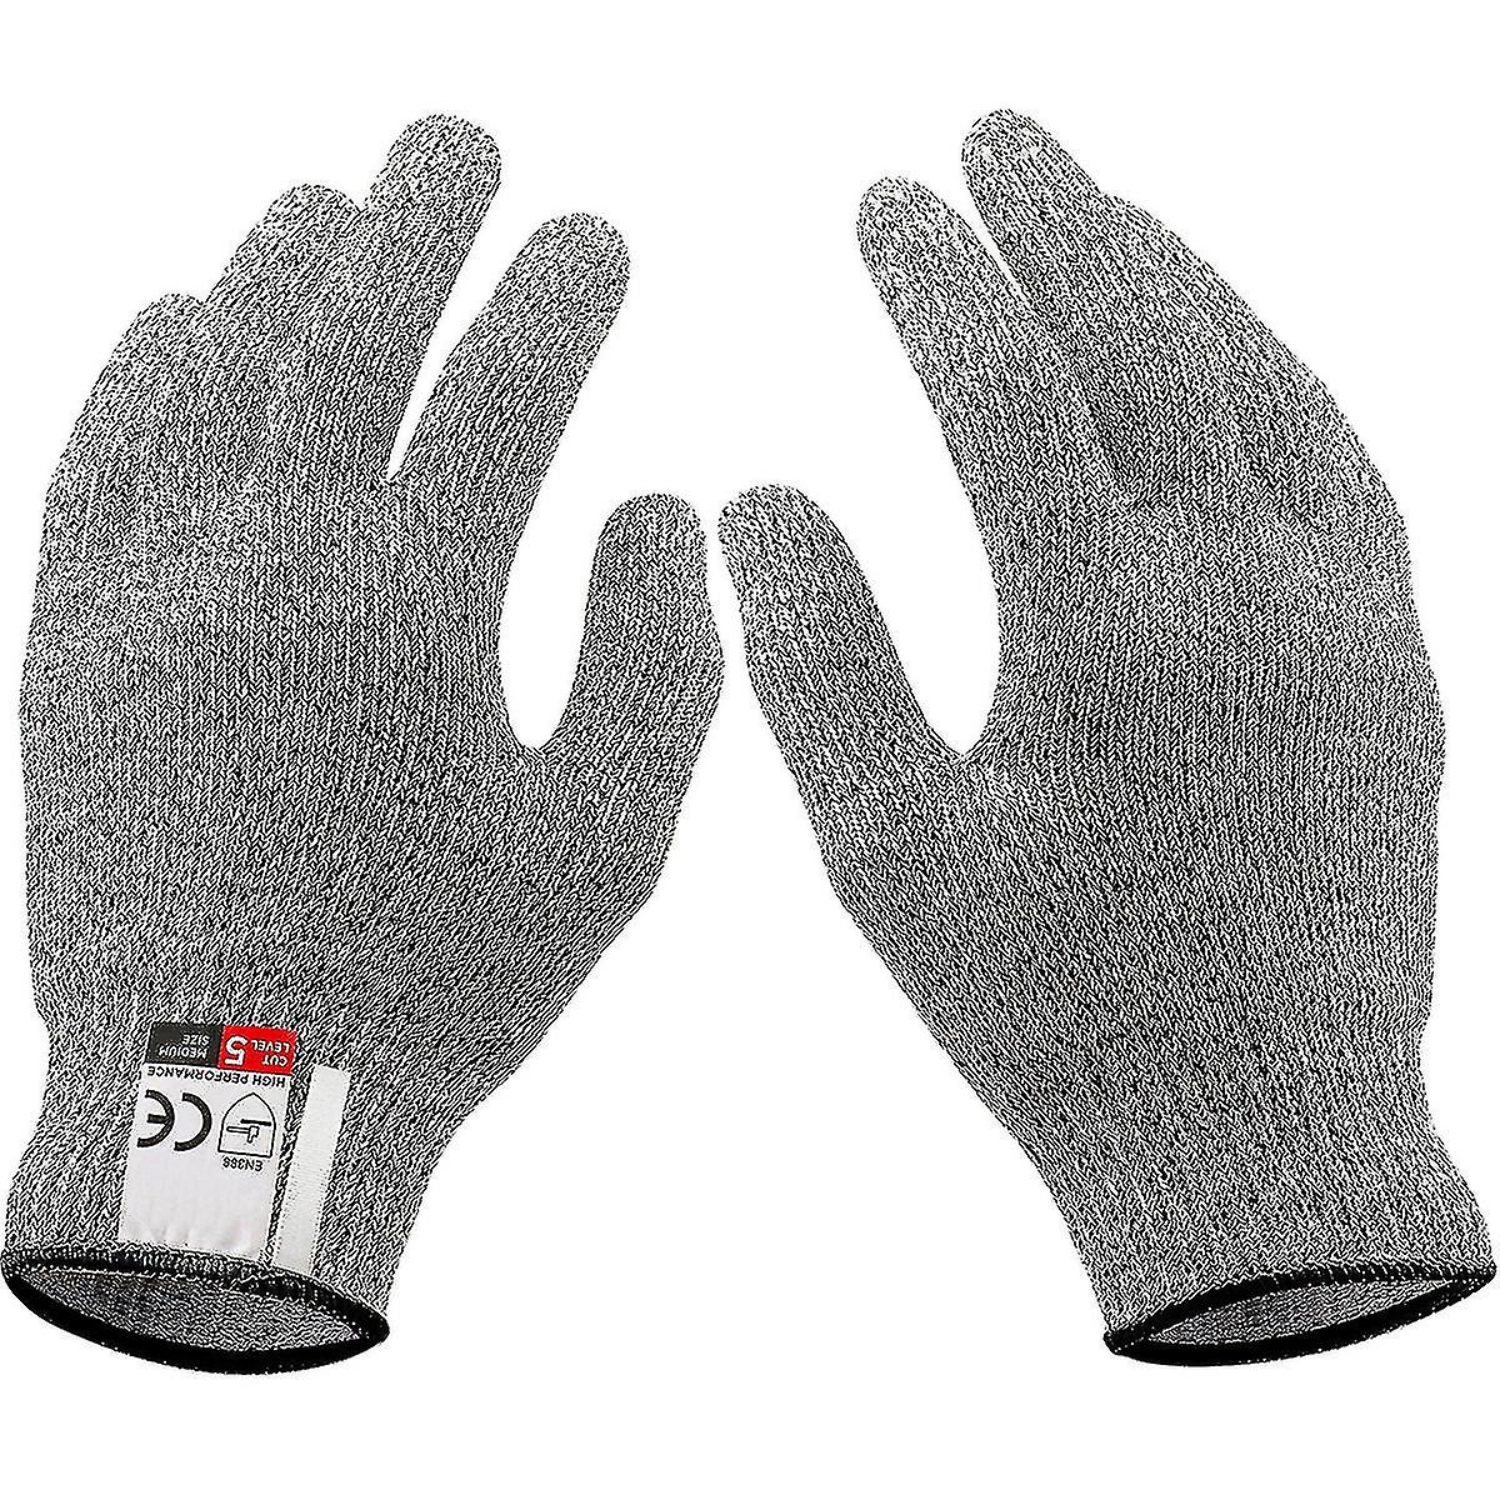 Cut Resistant Hand Gloves | Anti Cutting Cut Resistant Hand Safety Gloves, Cut-Proof Hand Safety, Level 5 Protection - Kitchen, Gardening Care, Industrial (Free Size, Grey)